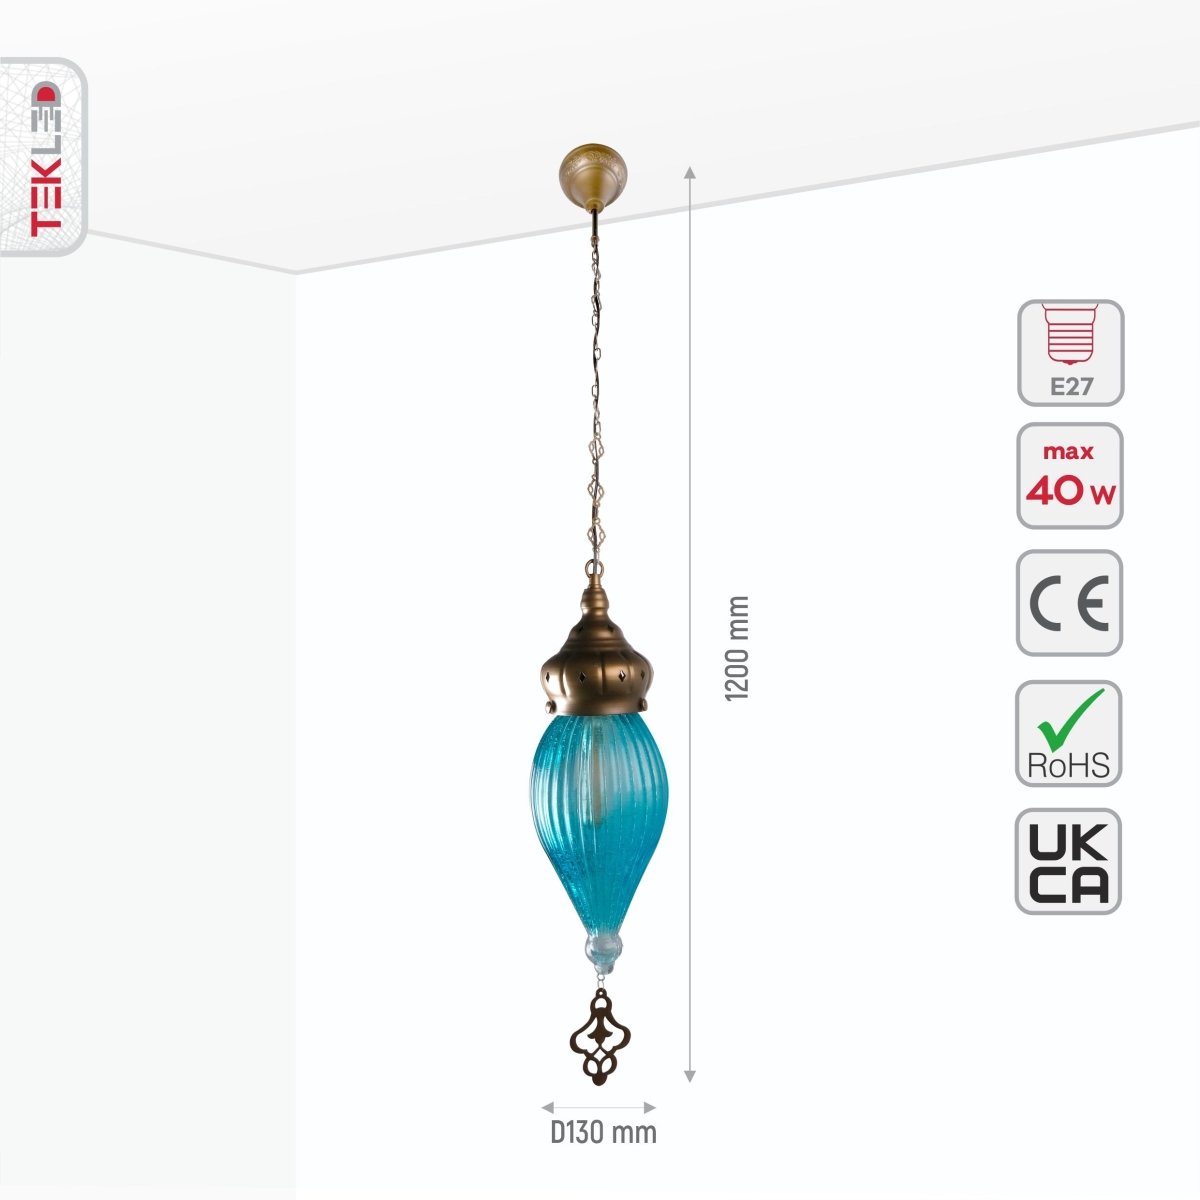 Size and specs of Moroccan Style Antique Brass and Blue Glass Pendant Light E27 | TEKLED 158-195581